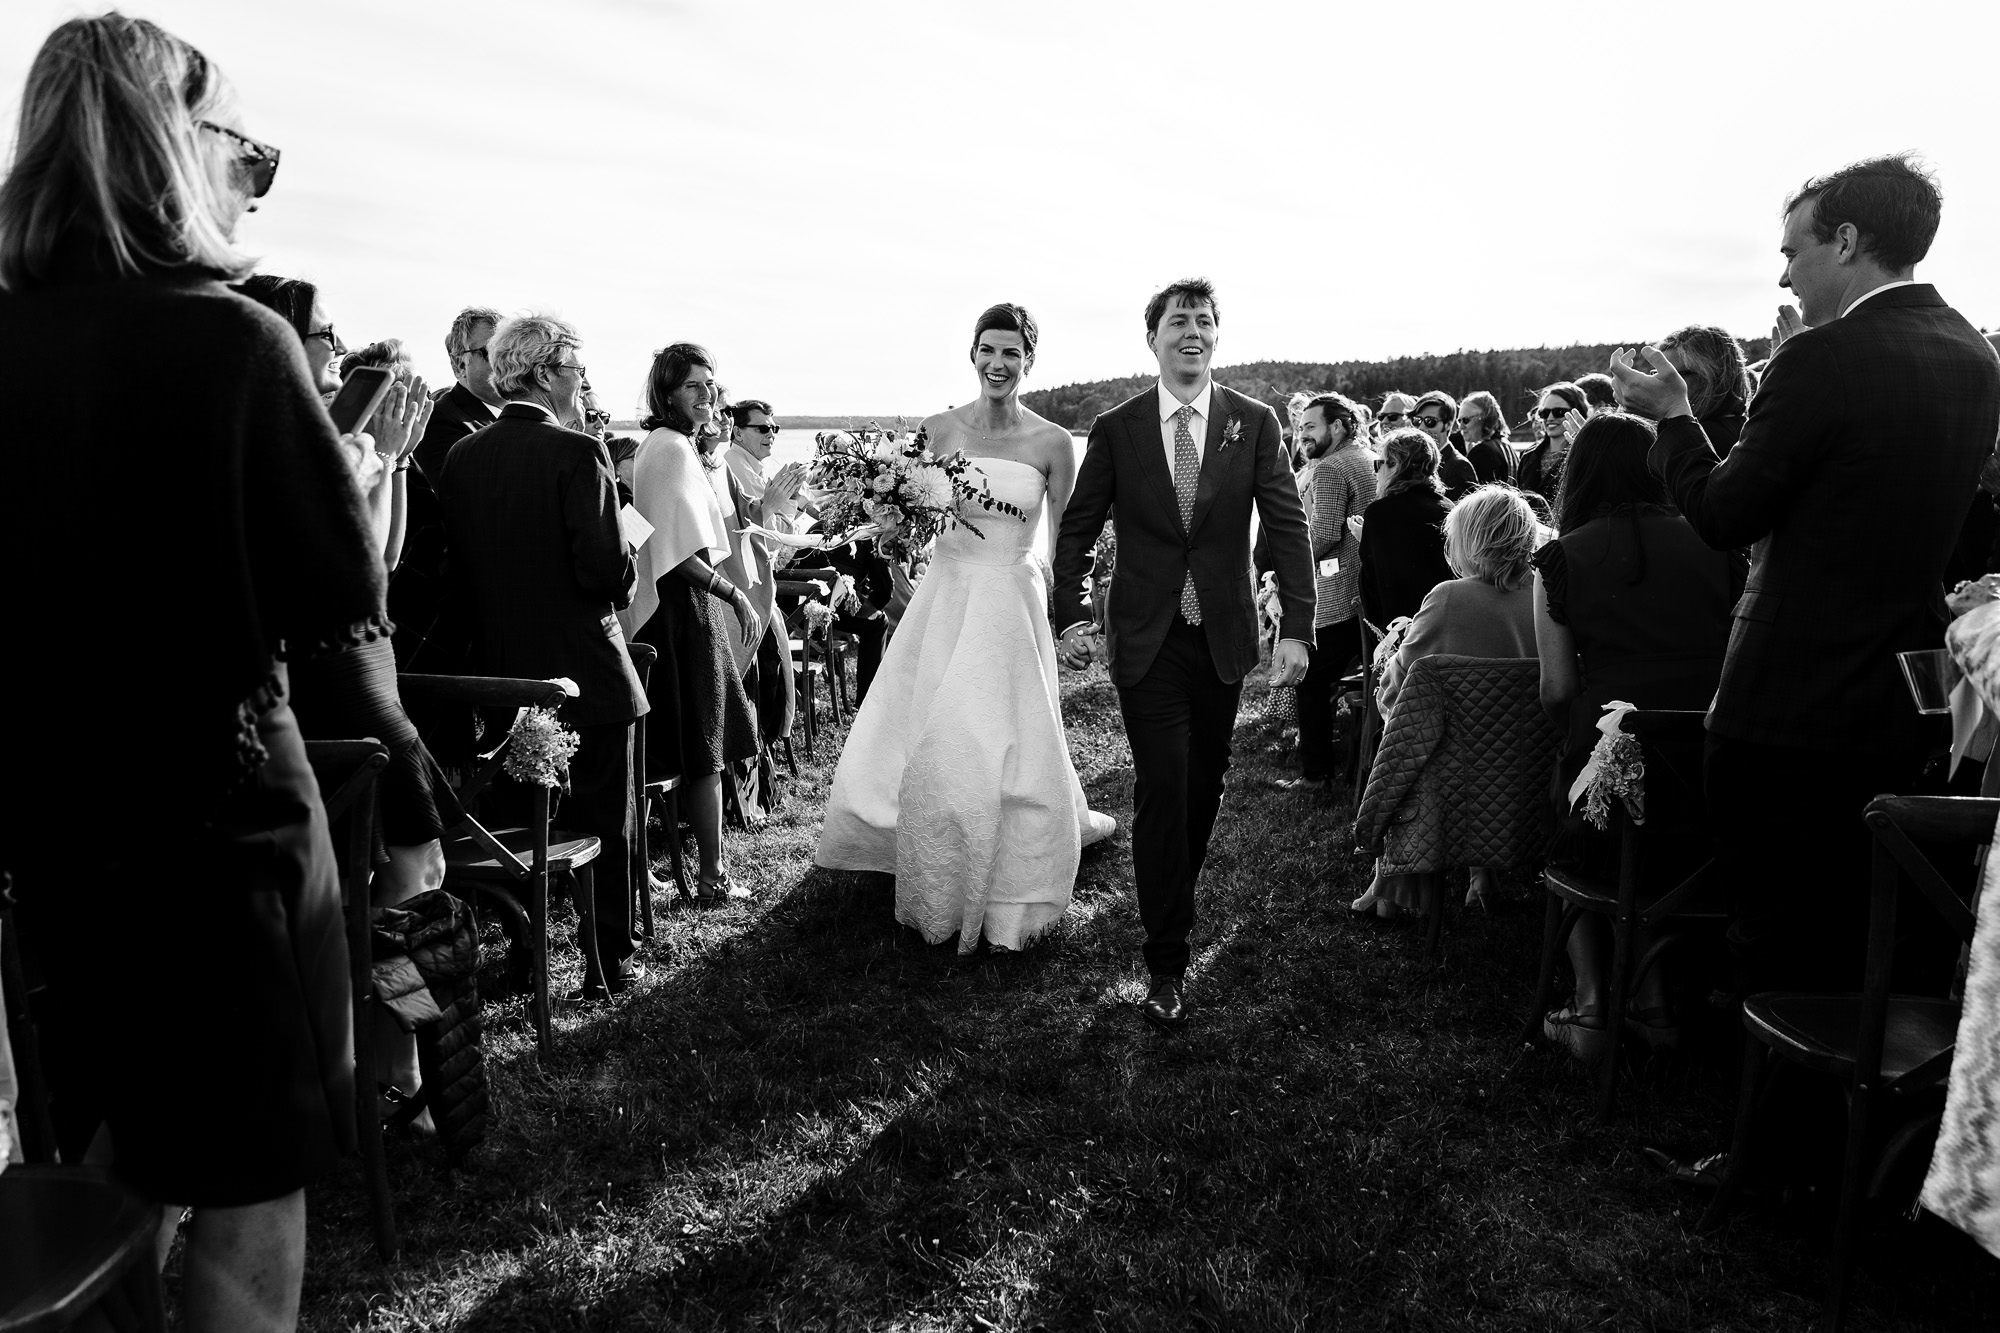 A newly married couple walks down the aisle of their wedding ceremony in Maine